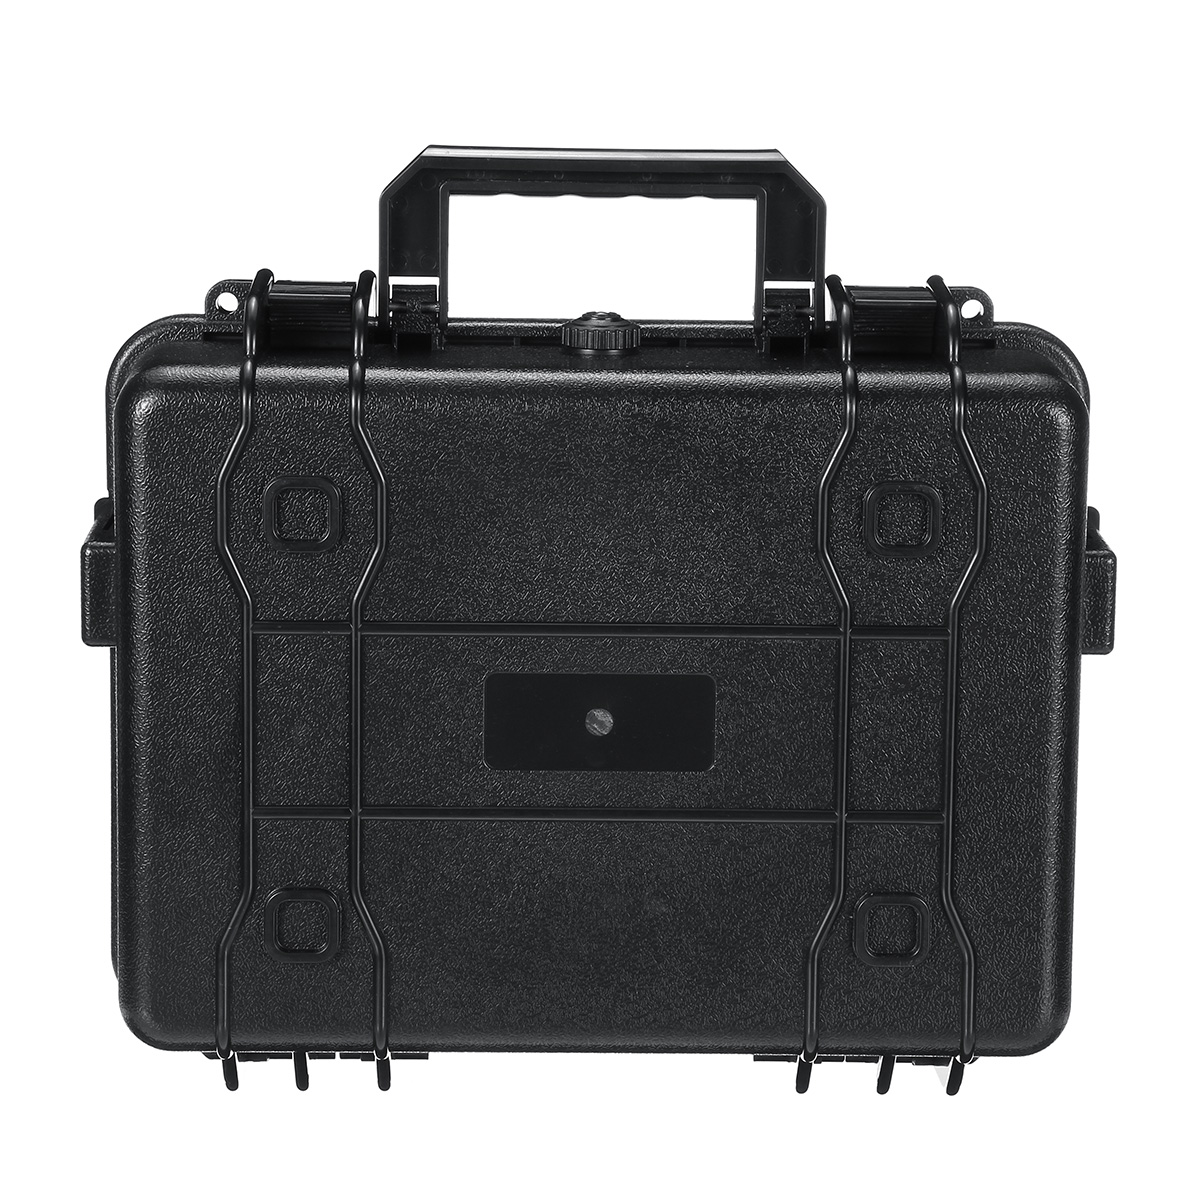 Outdoor-Portable-EDC-Instrument-Tool-Kits-Box-Waterproof-Shockproof-Protective-Safety-Storage-Case-1553948-4